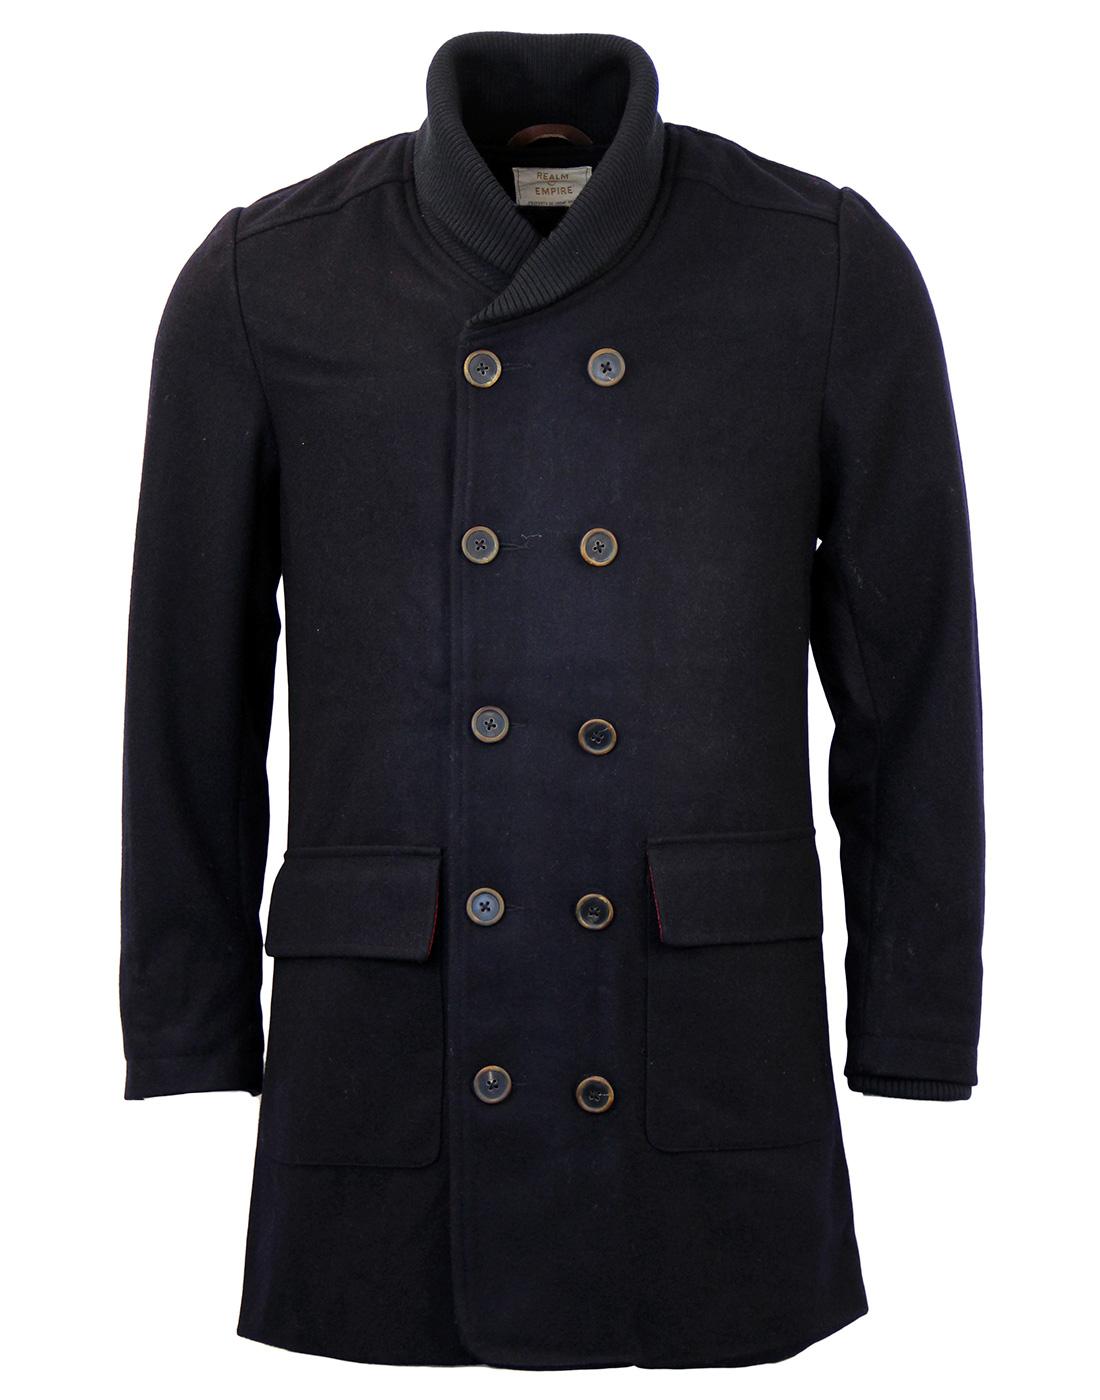 REALM & EMPIRE Panton Double Breasted Pilot Jacket in Navy